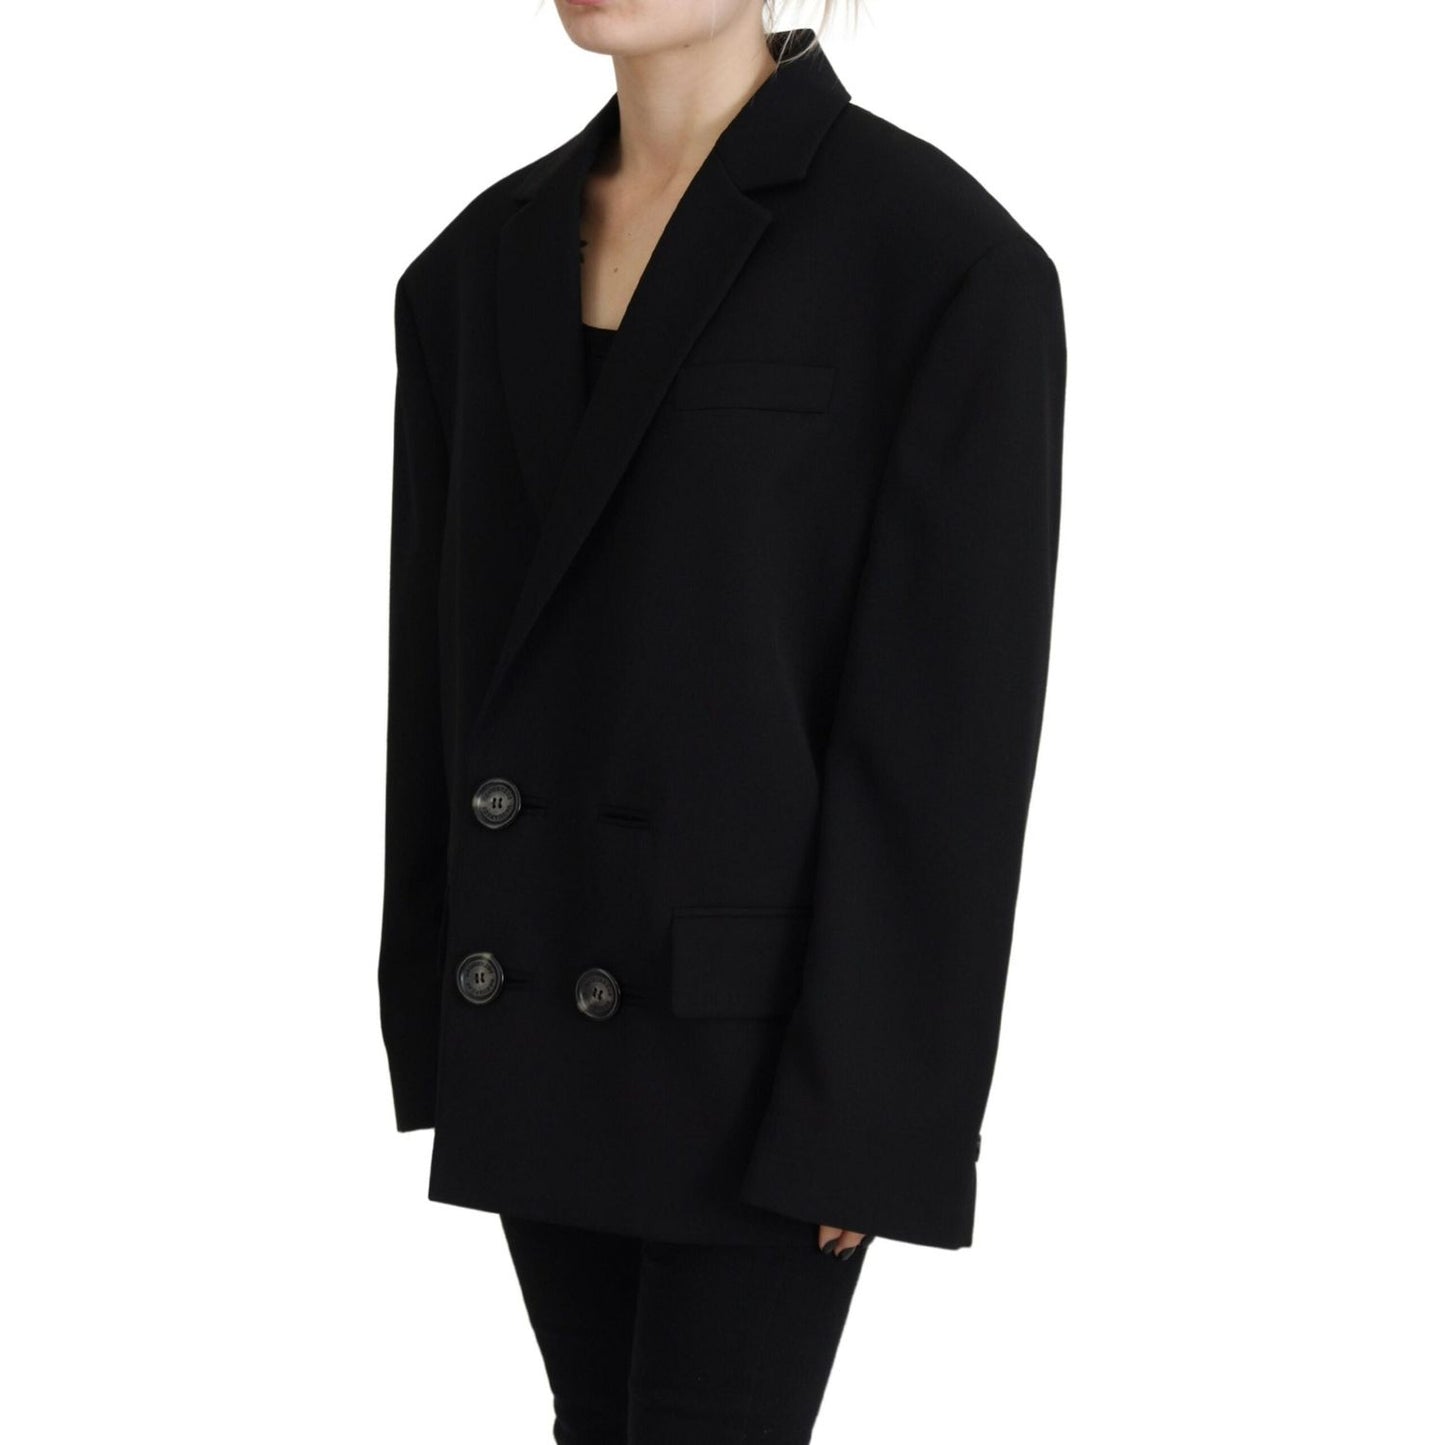 Dsquared² Black Double Breasted Coat Blazer Jacket black-double-breasted-coat-blazer-jacket-1